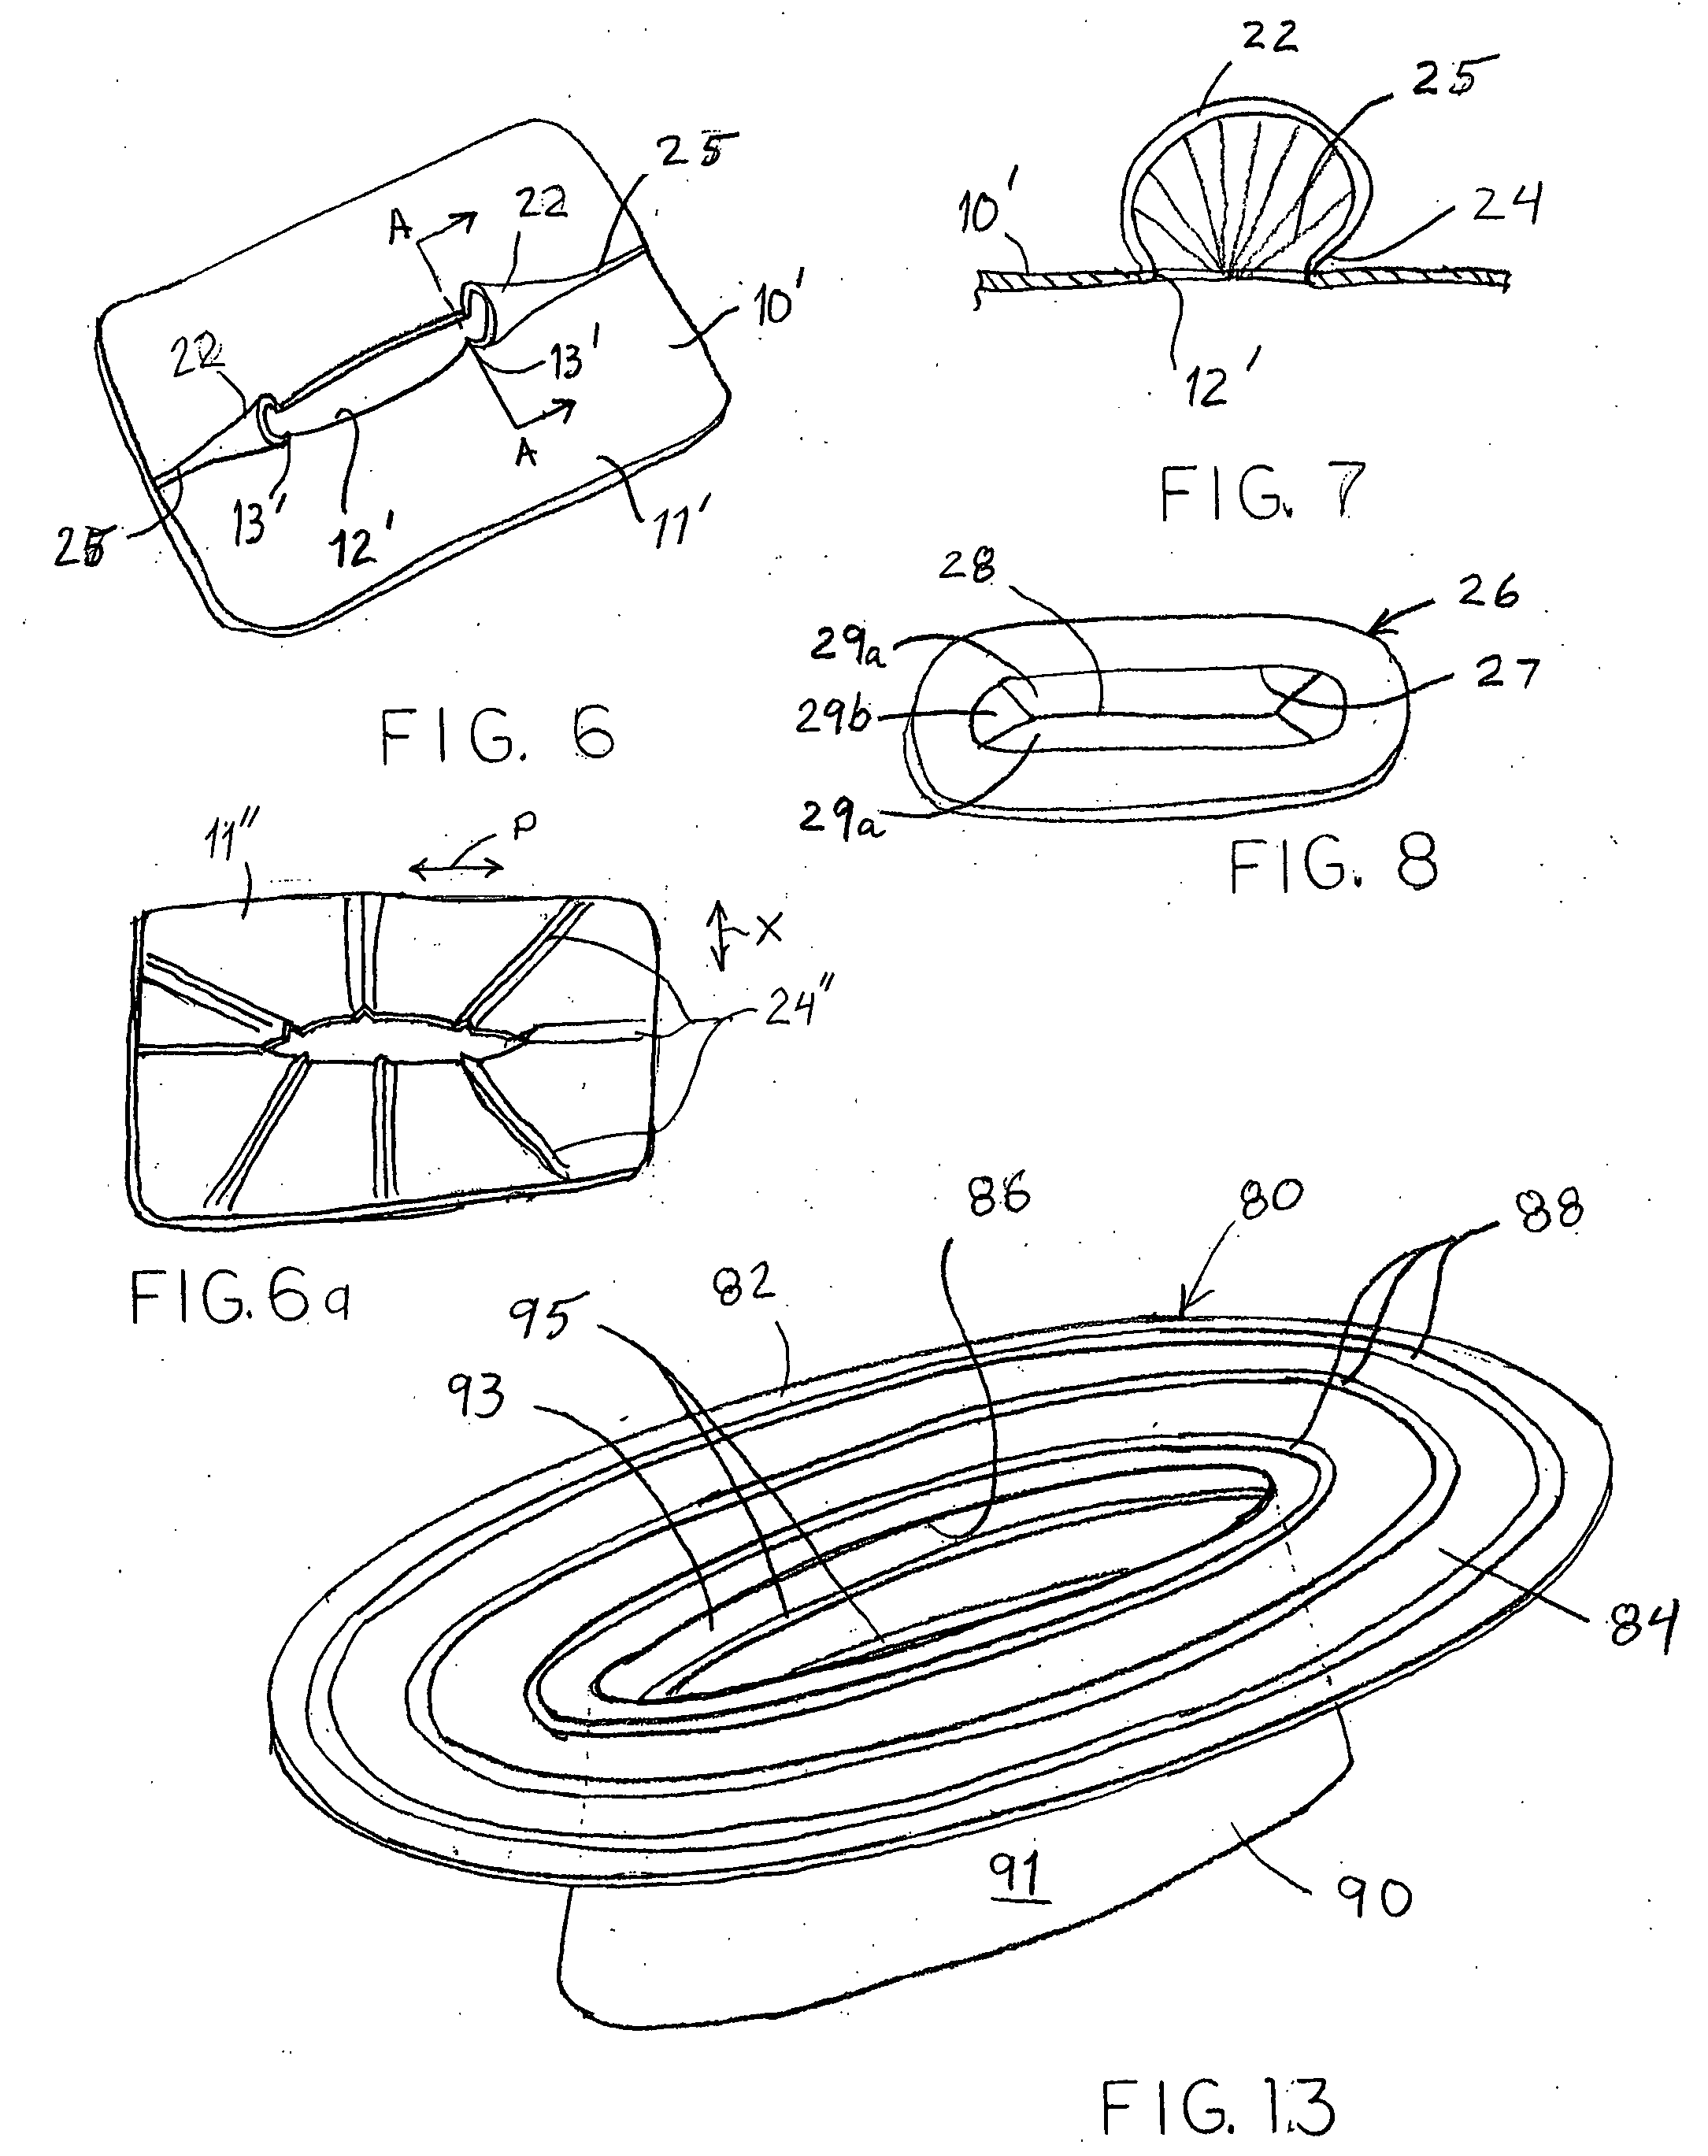 Devices and methods for protecting tissue at a surgical site